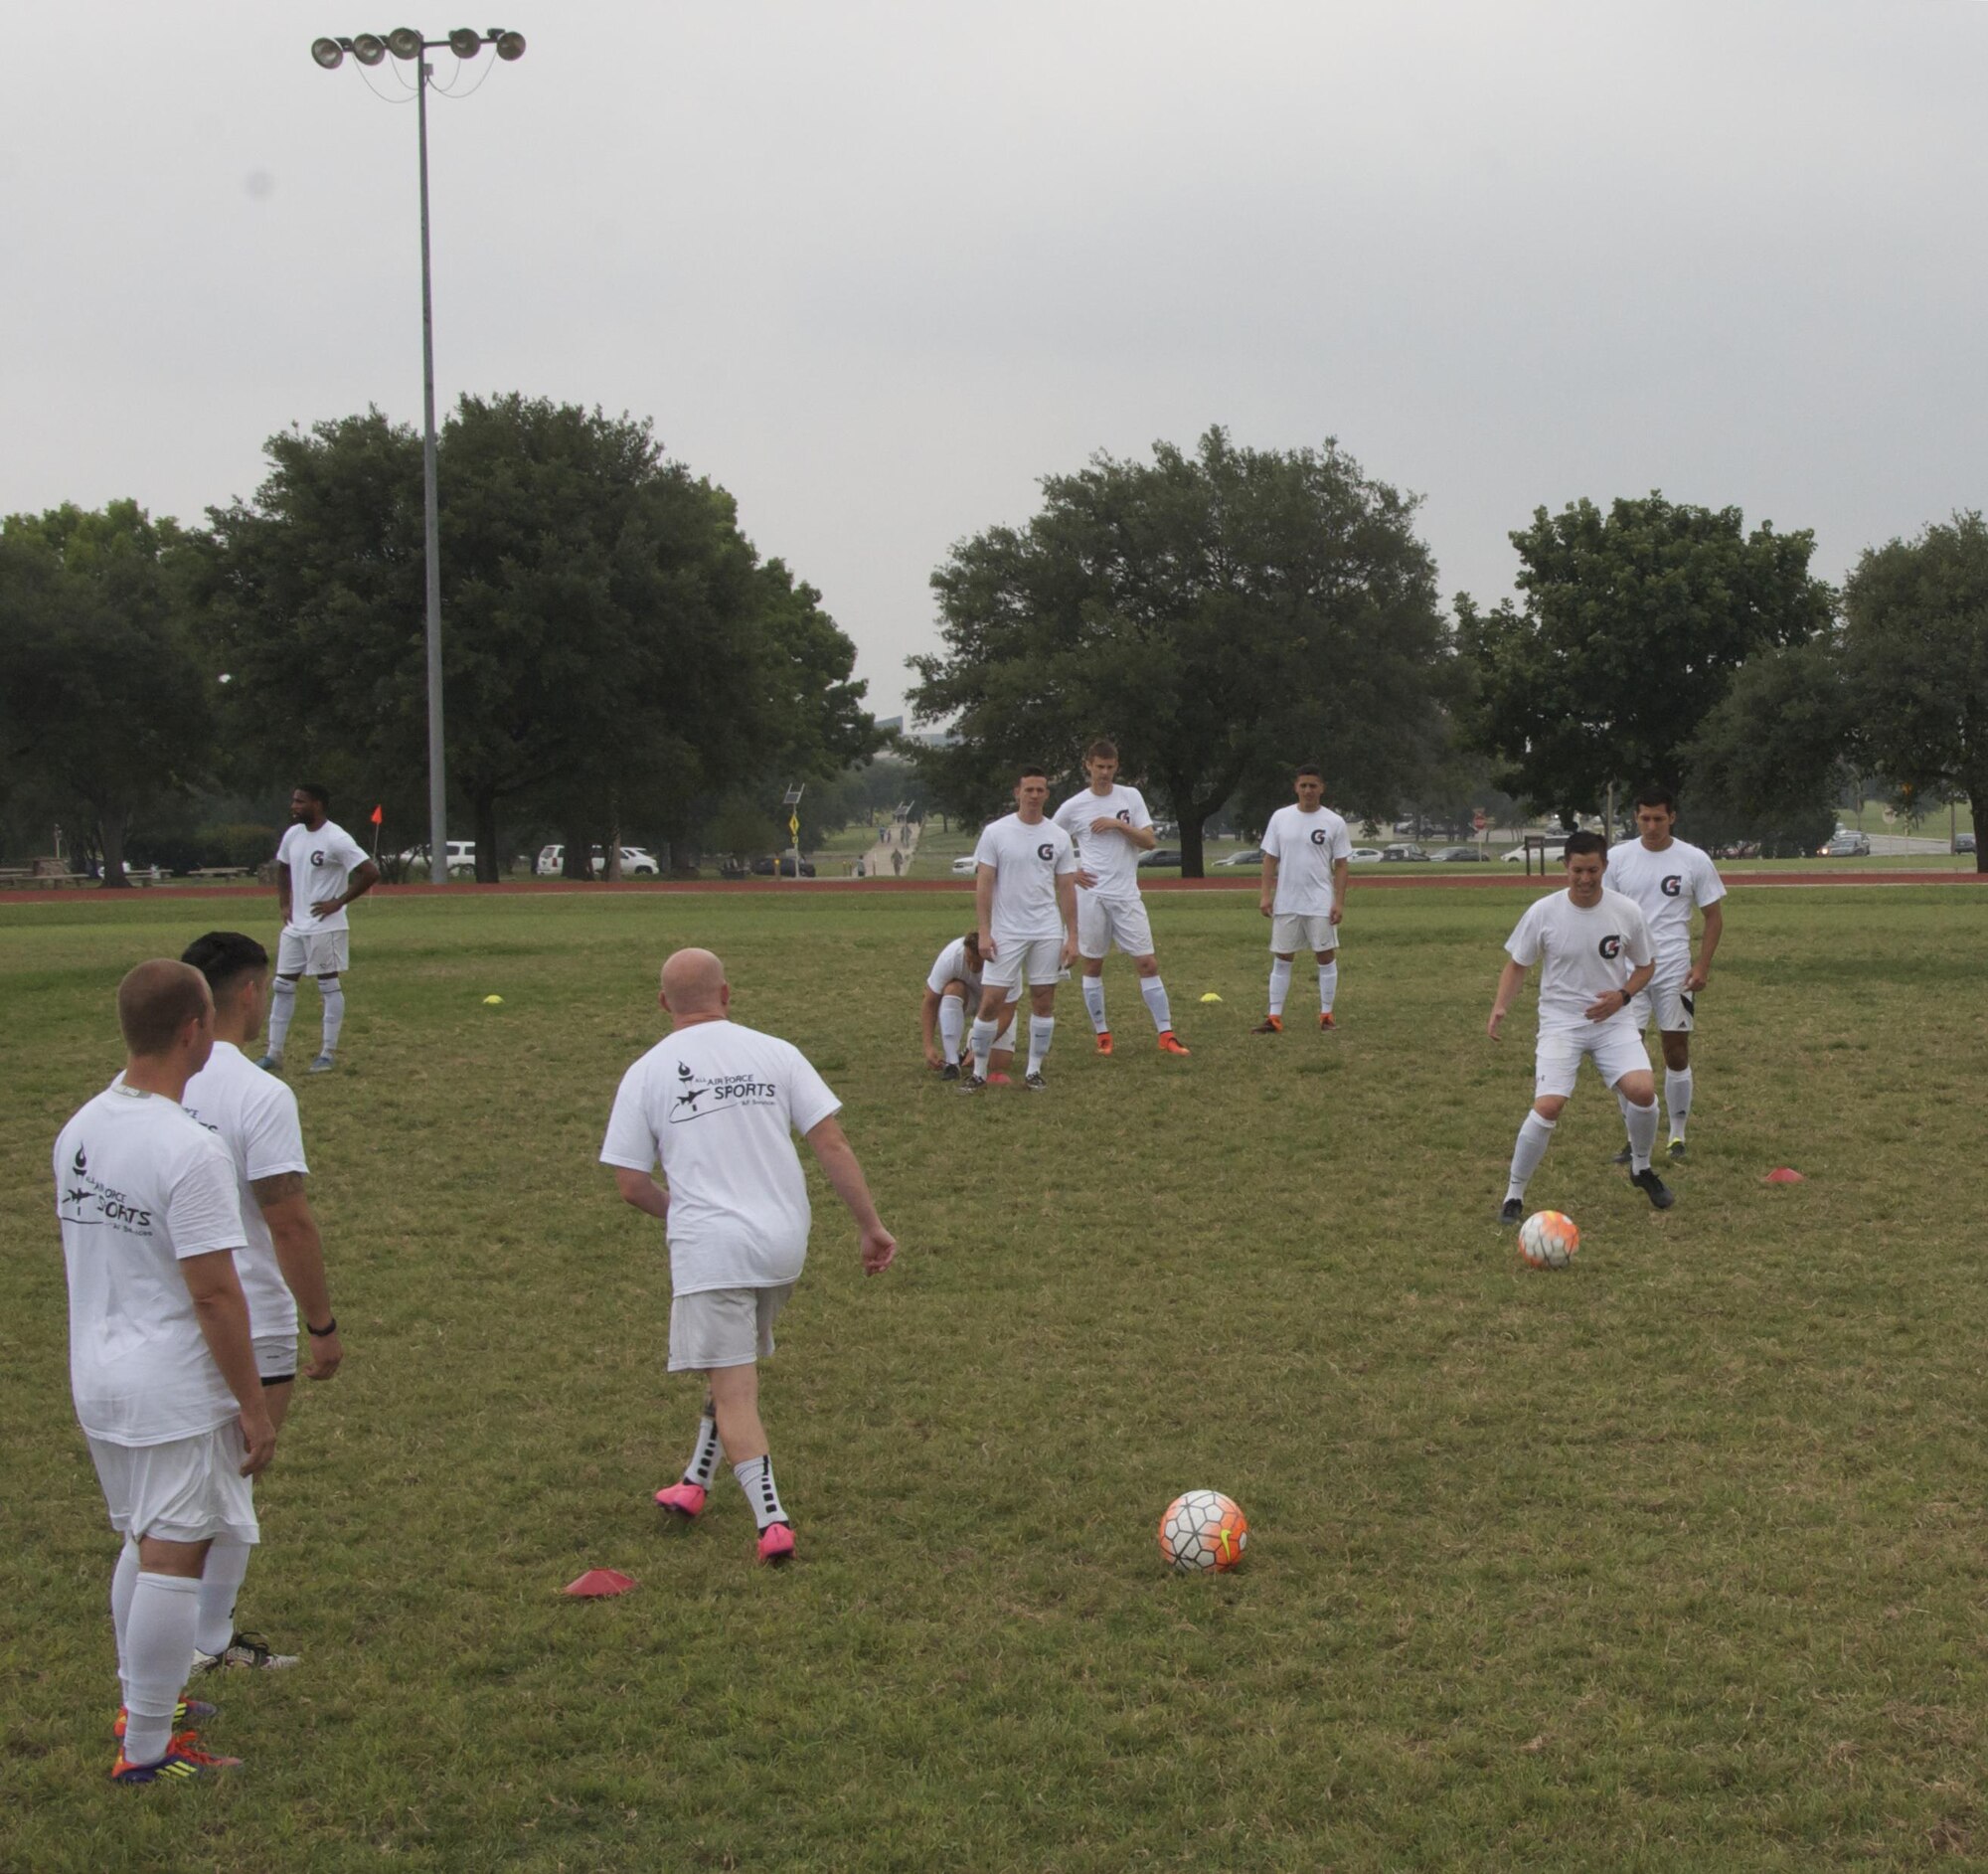 The All-Air Force men's soccer team practices April 29 at Joint Base San Antonio-Lackland, Texas. The team trained three times a day during the 2 1/2-week training camp. (U.S. Air Force photo/Steve Warns/released)